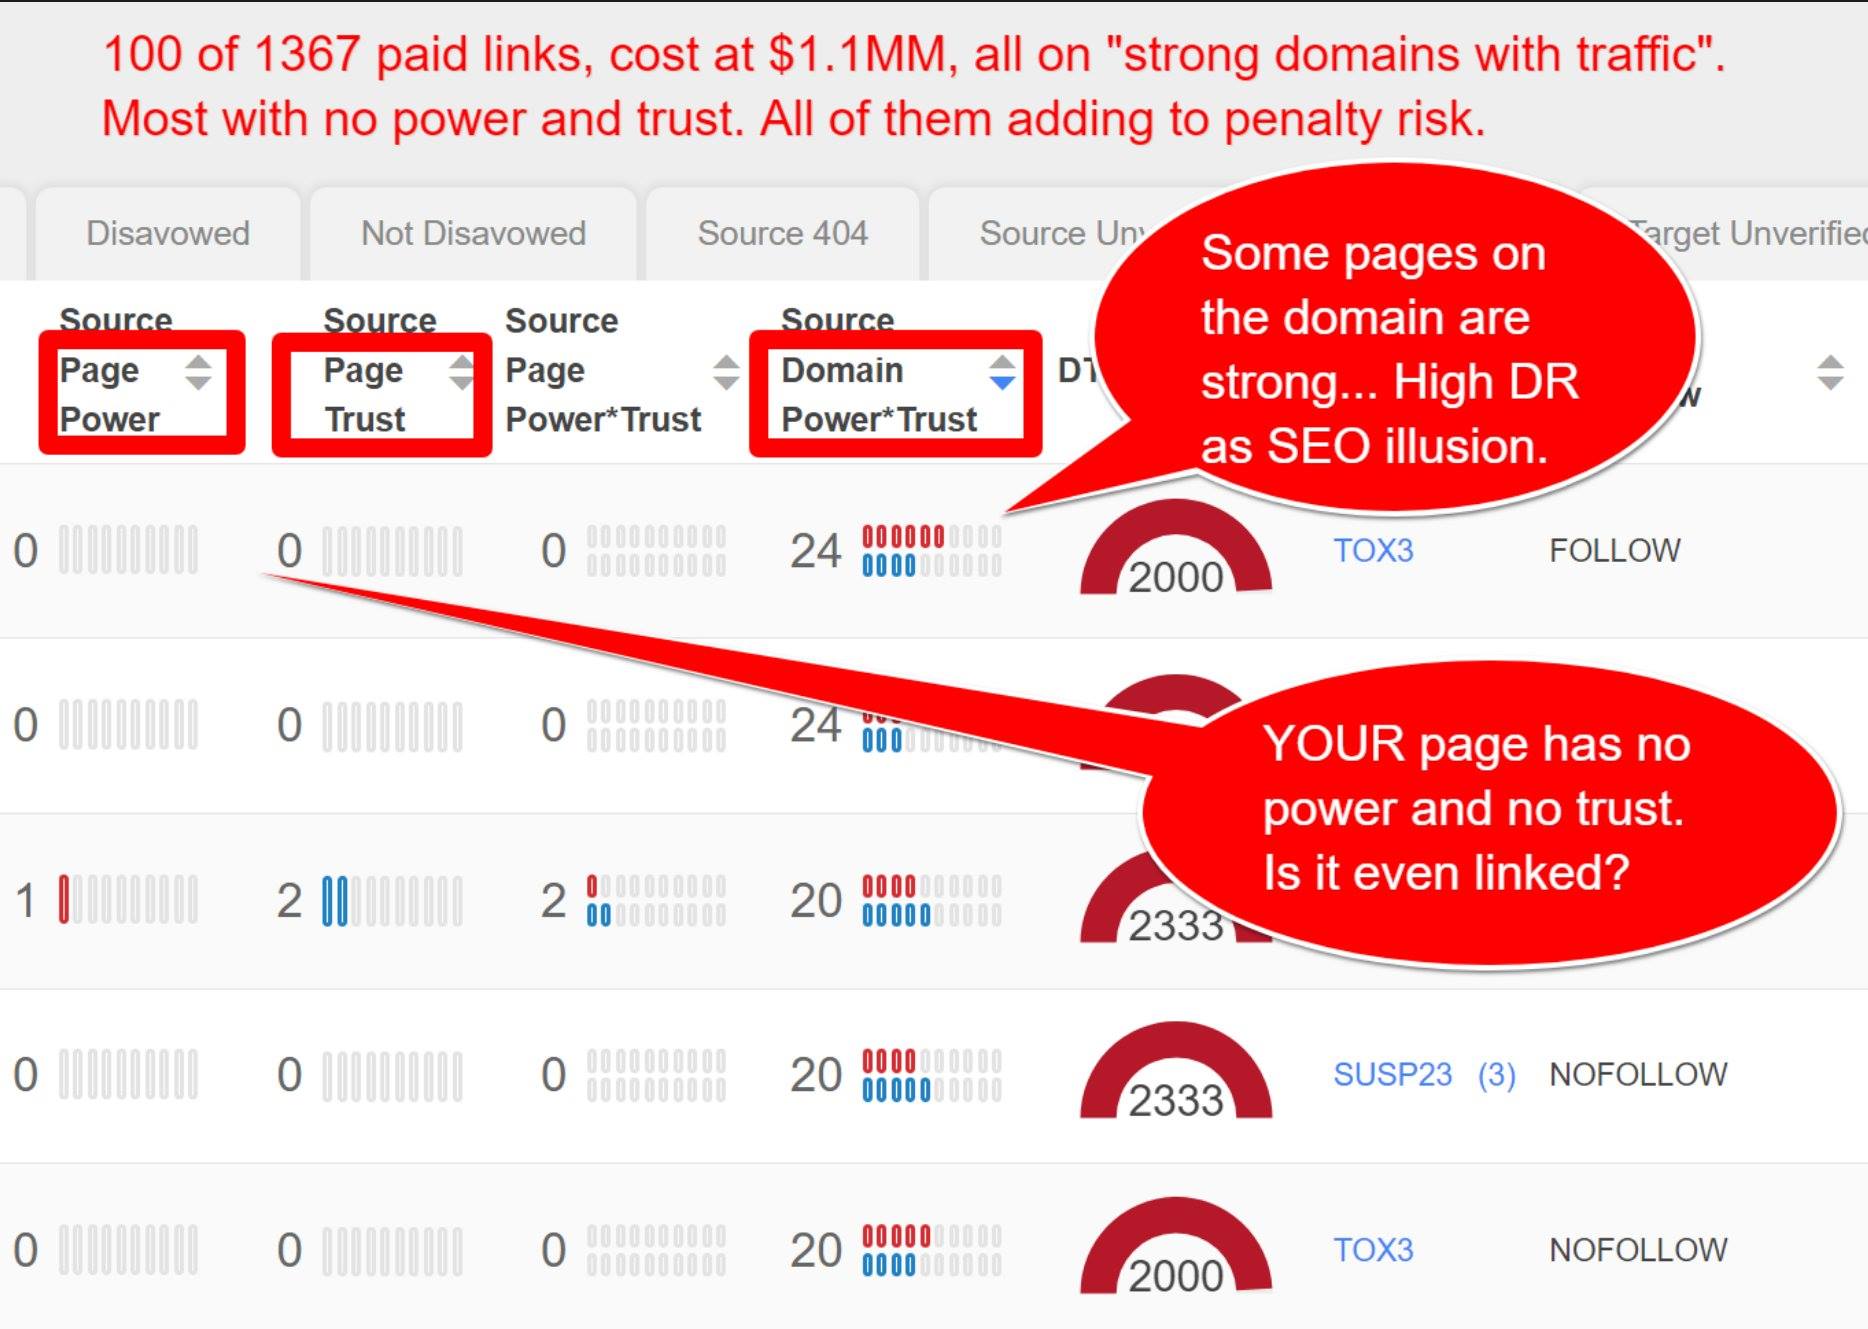 Some of the really poor links acquired for over a million USD